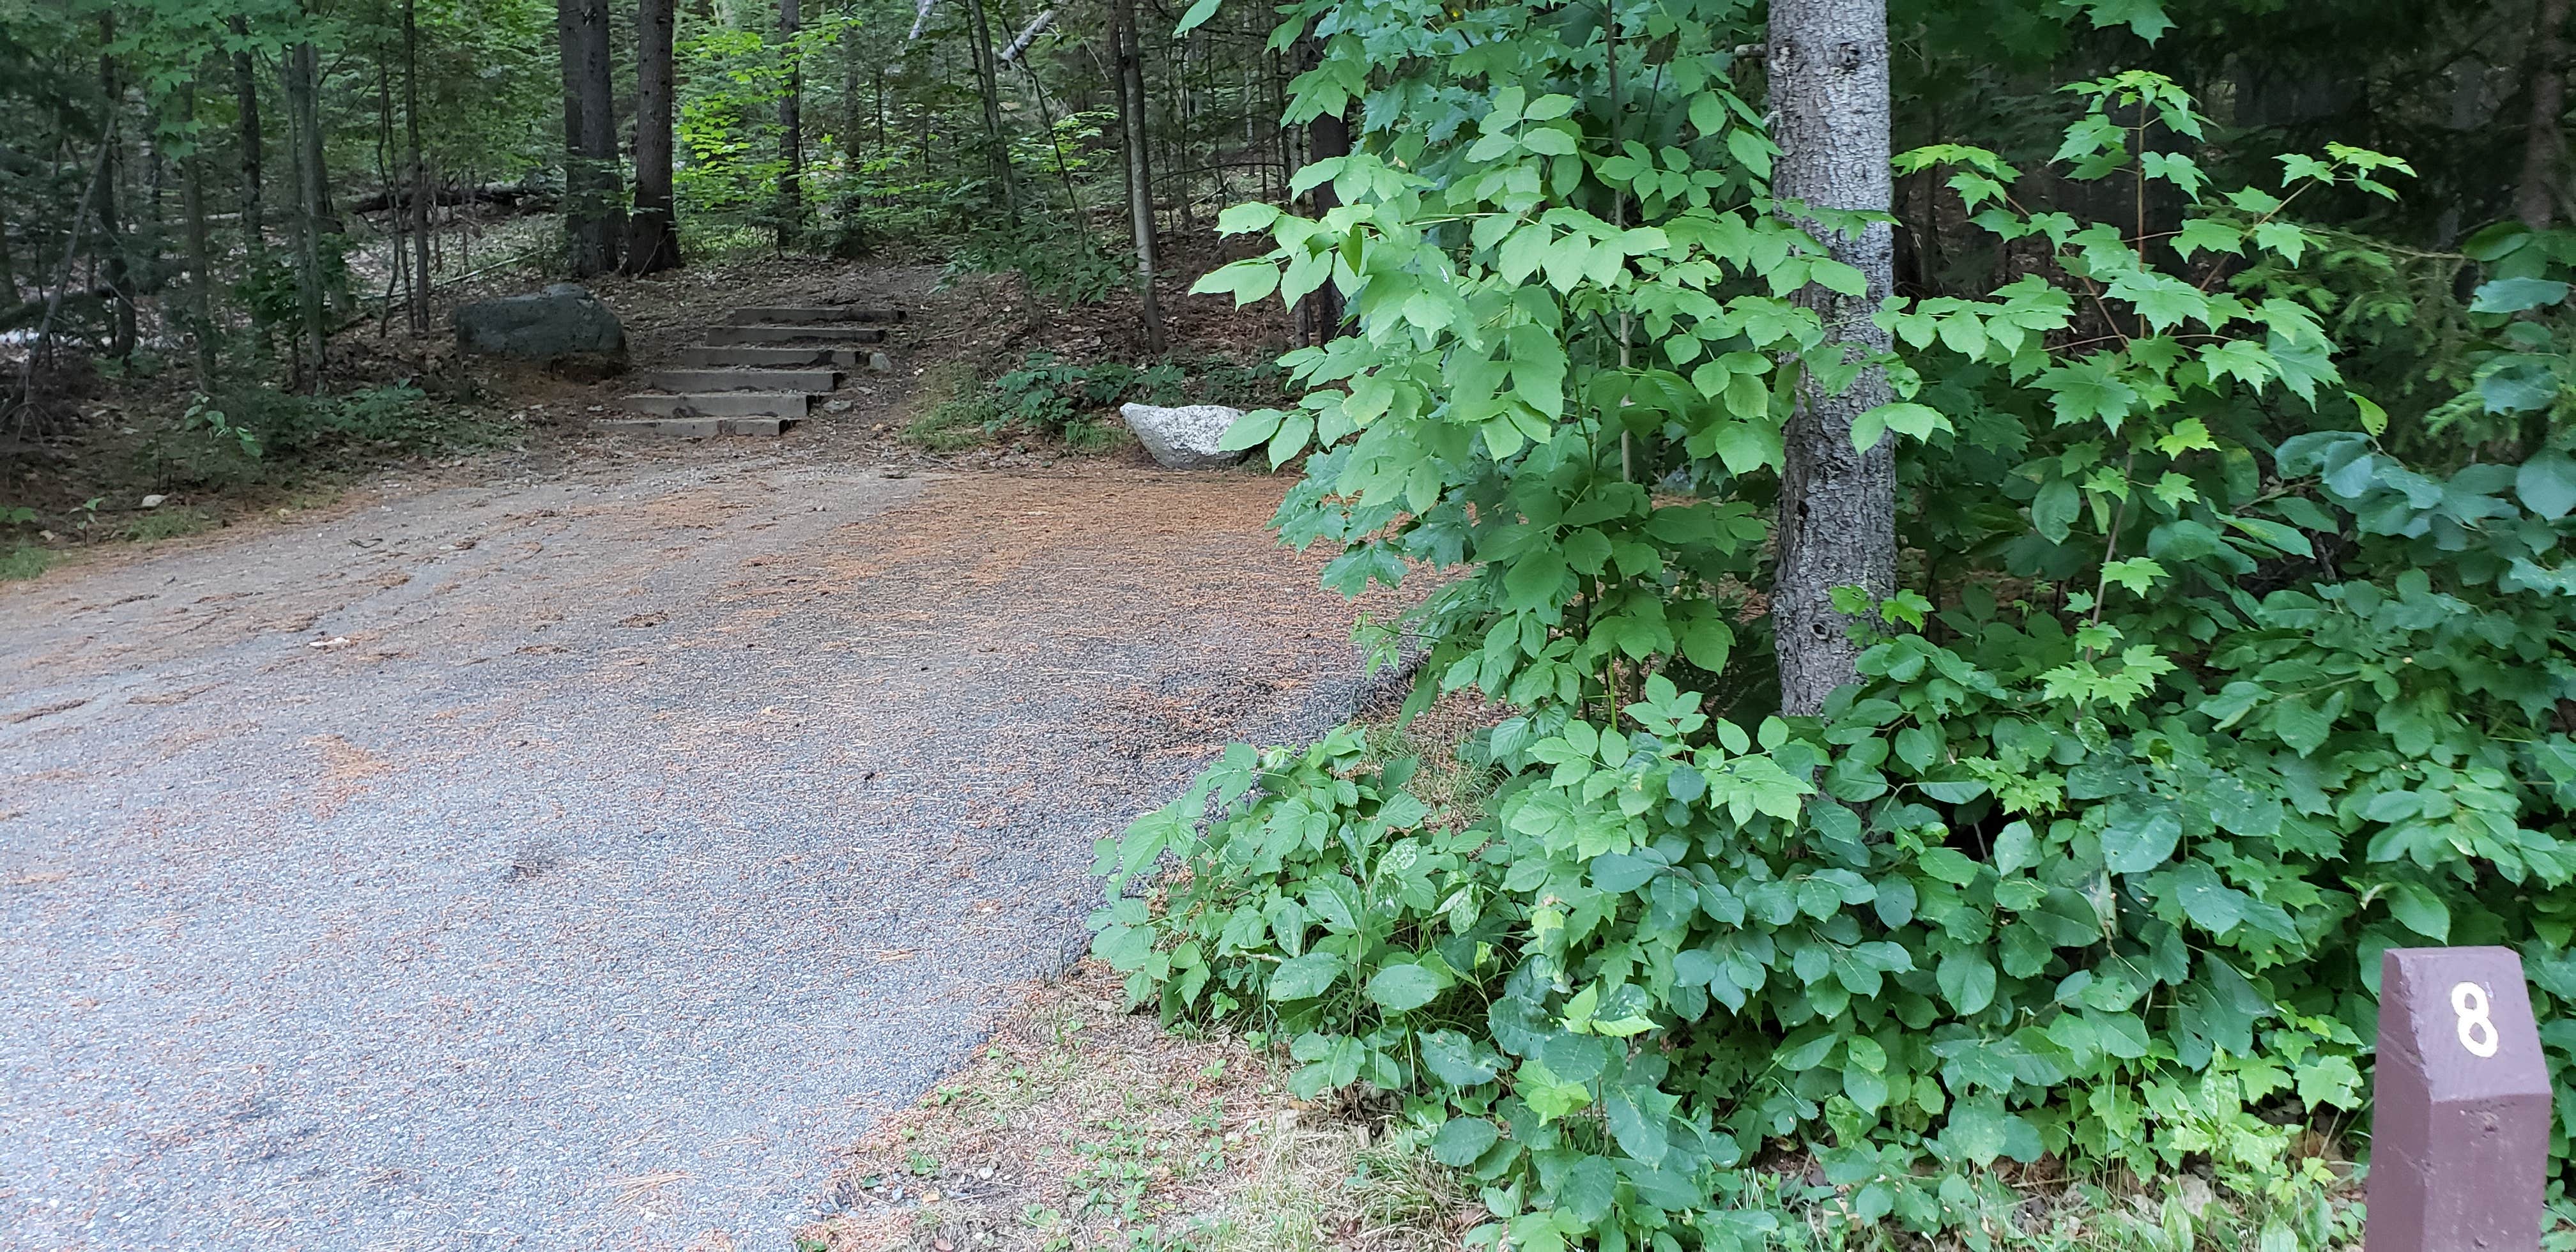 Site 8 has a parking area and then several steps and a path to a more secluded camping area